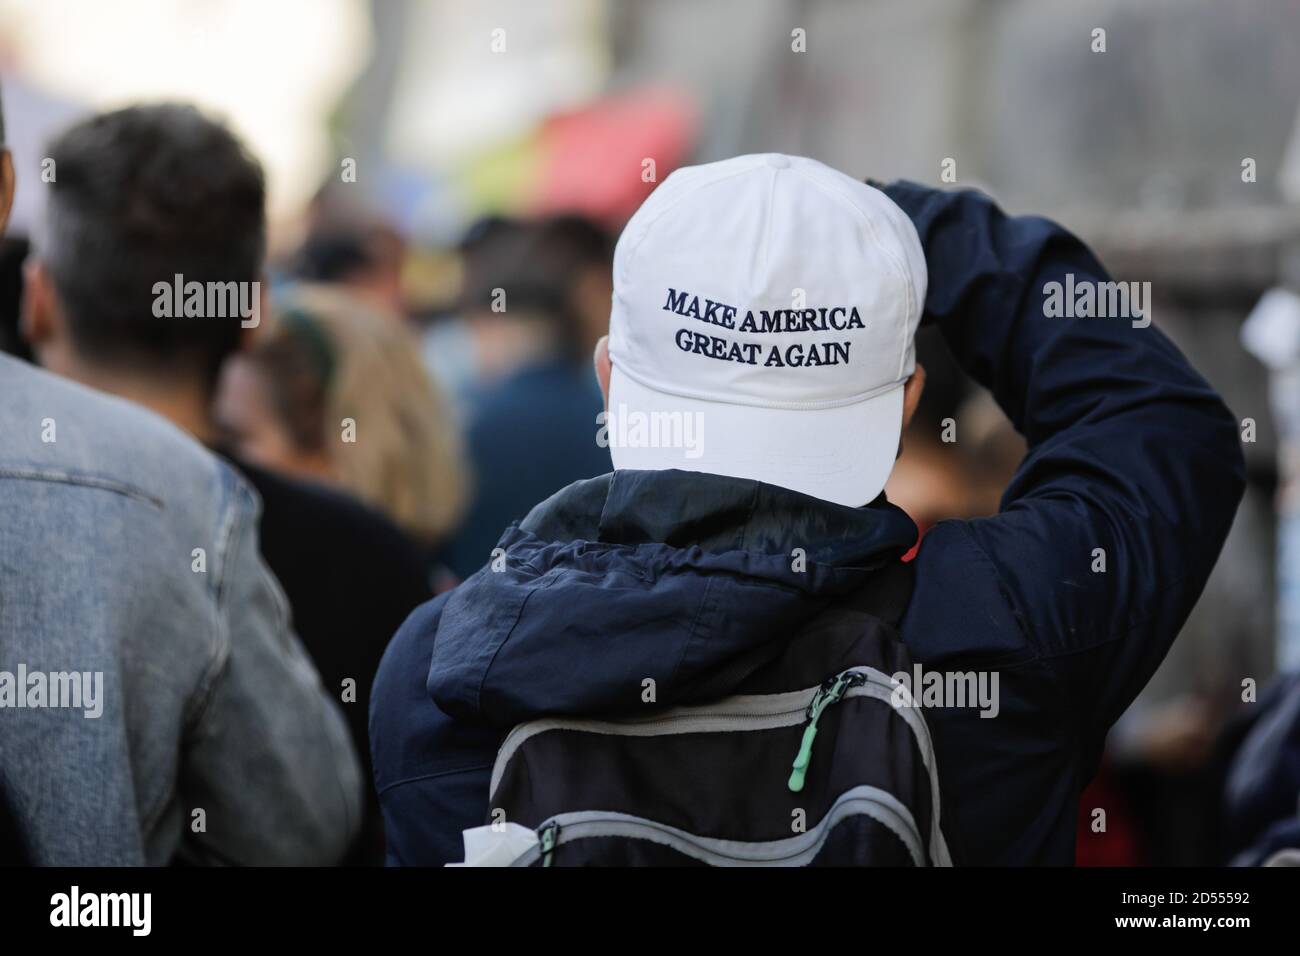 Bucharest, Romania - October 10, 2020: Man wears Make America Great Again cap during a political rally. Stock Photo